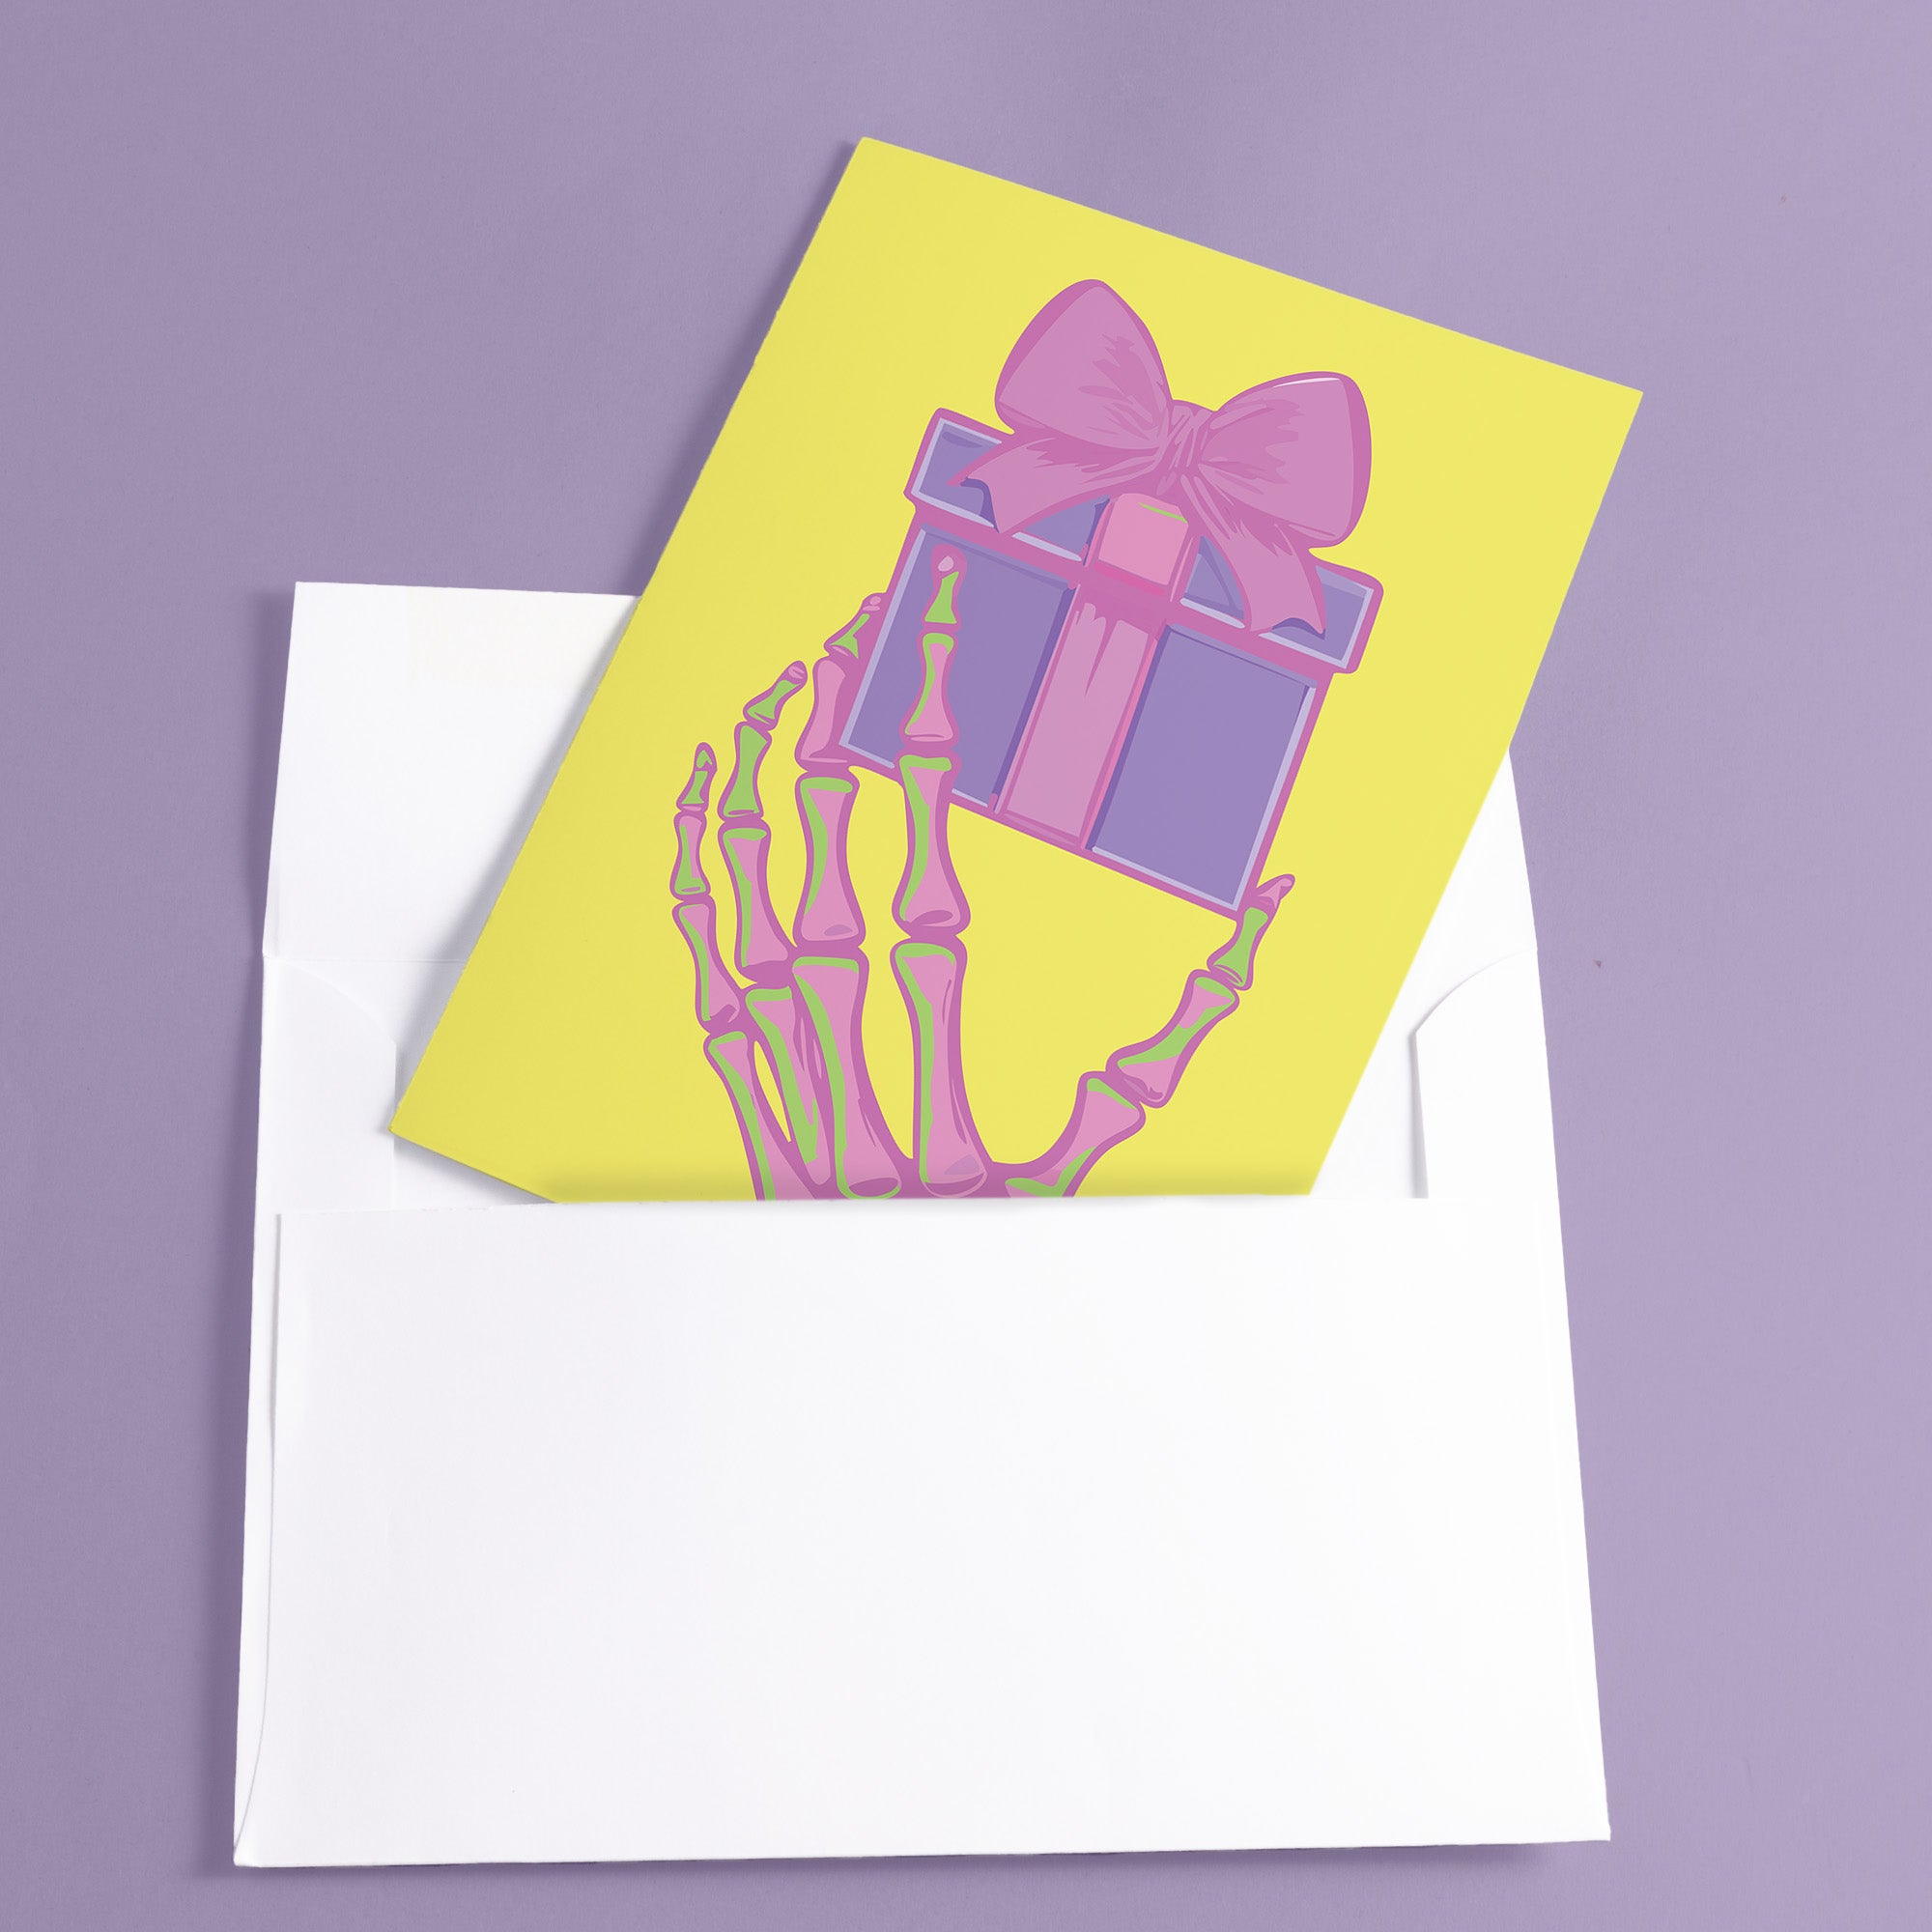 Birthday card with vibrant yellow background. A pink and green skeletal hand holds a purple and pink gift box with large pink bow. The illustration blends festive and spooky elements, creating a playful Halloween-meets-birthday aesthetic. The stylized, colorful design uses contrasting bright colors for a eye-catching effect. Inside message reads: 'Unwrap the Magic. Embrace the Spook. It's Your Day to Shine!' - combining celebratory spirit with a touch of the macabre for a unique birthday greeting.